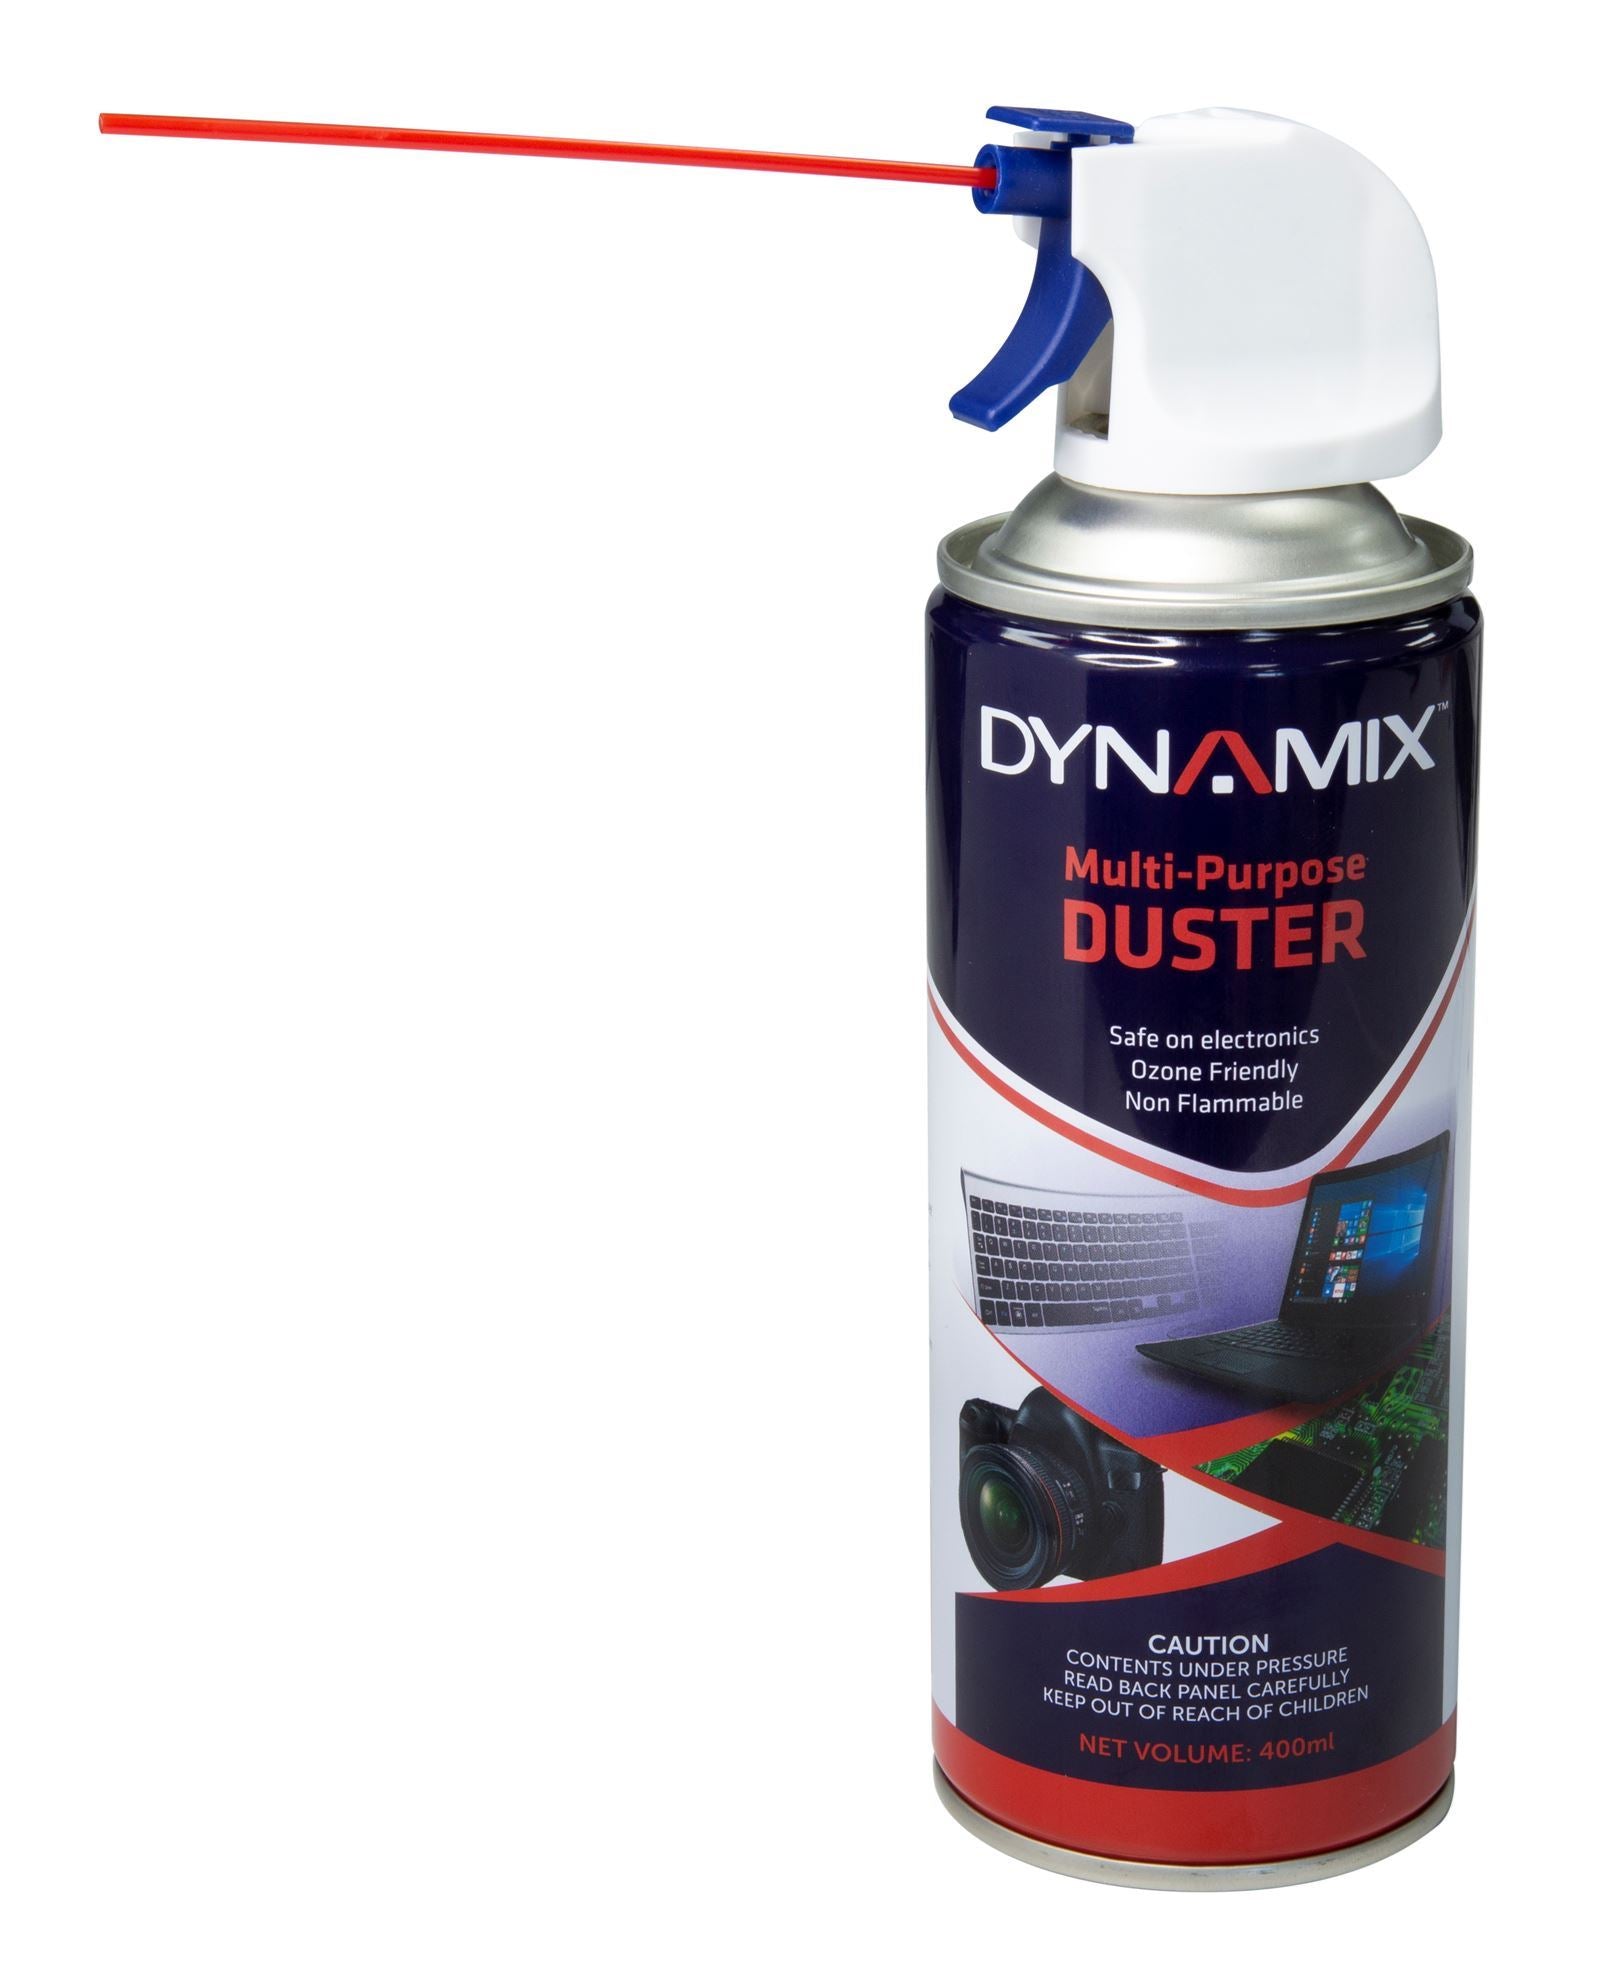 Dynamix air can with nozzle extended